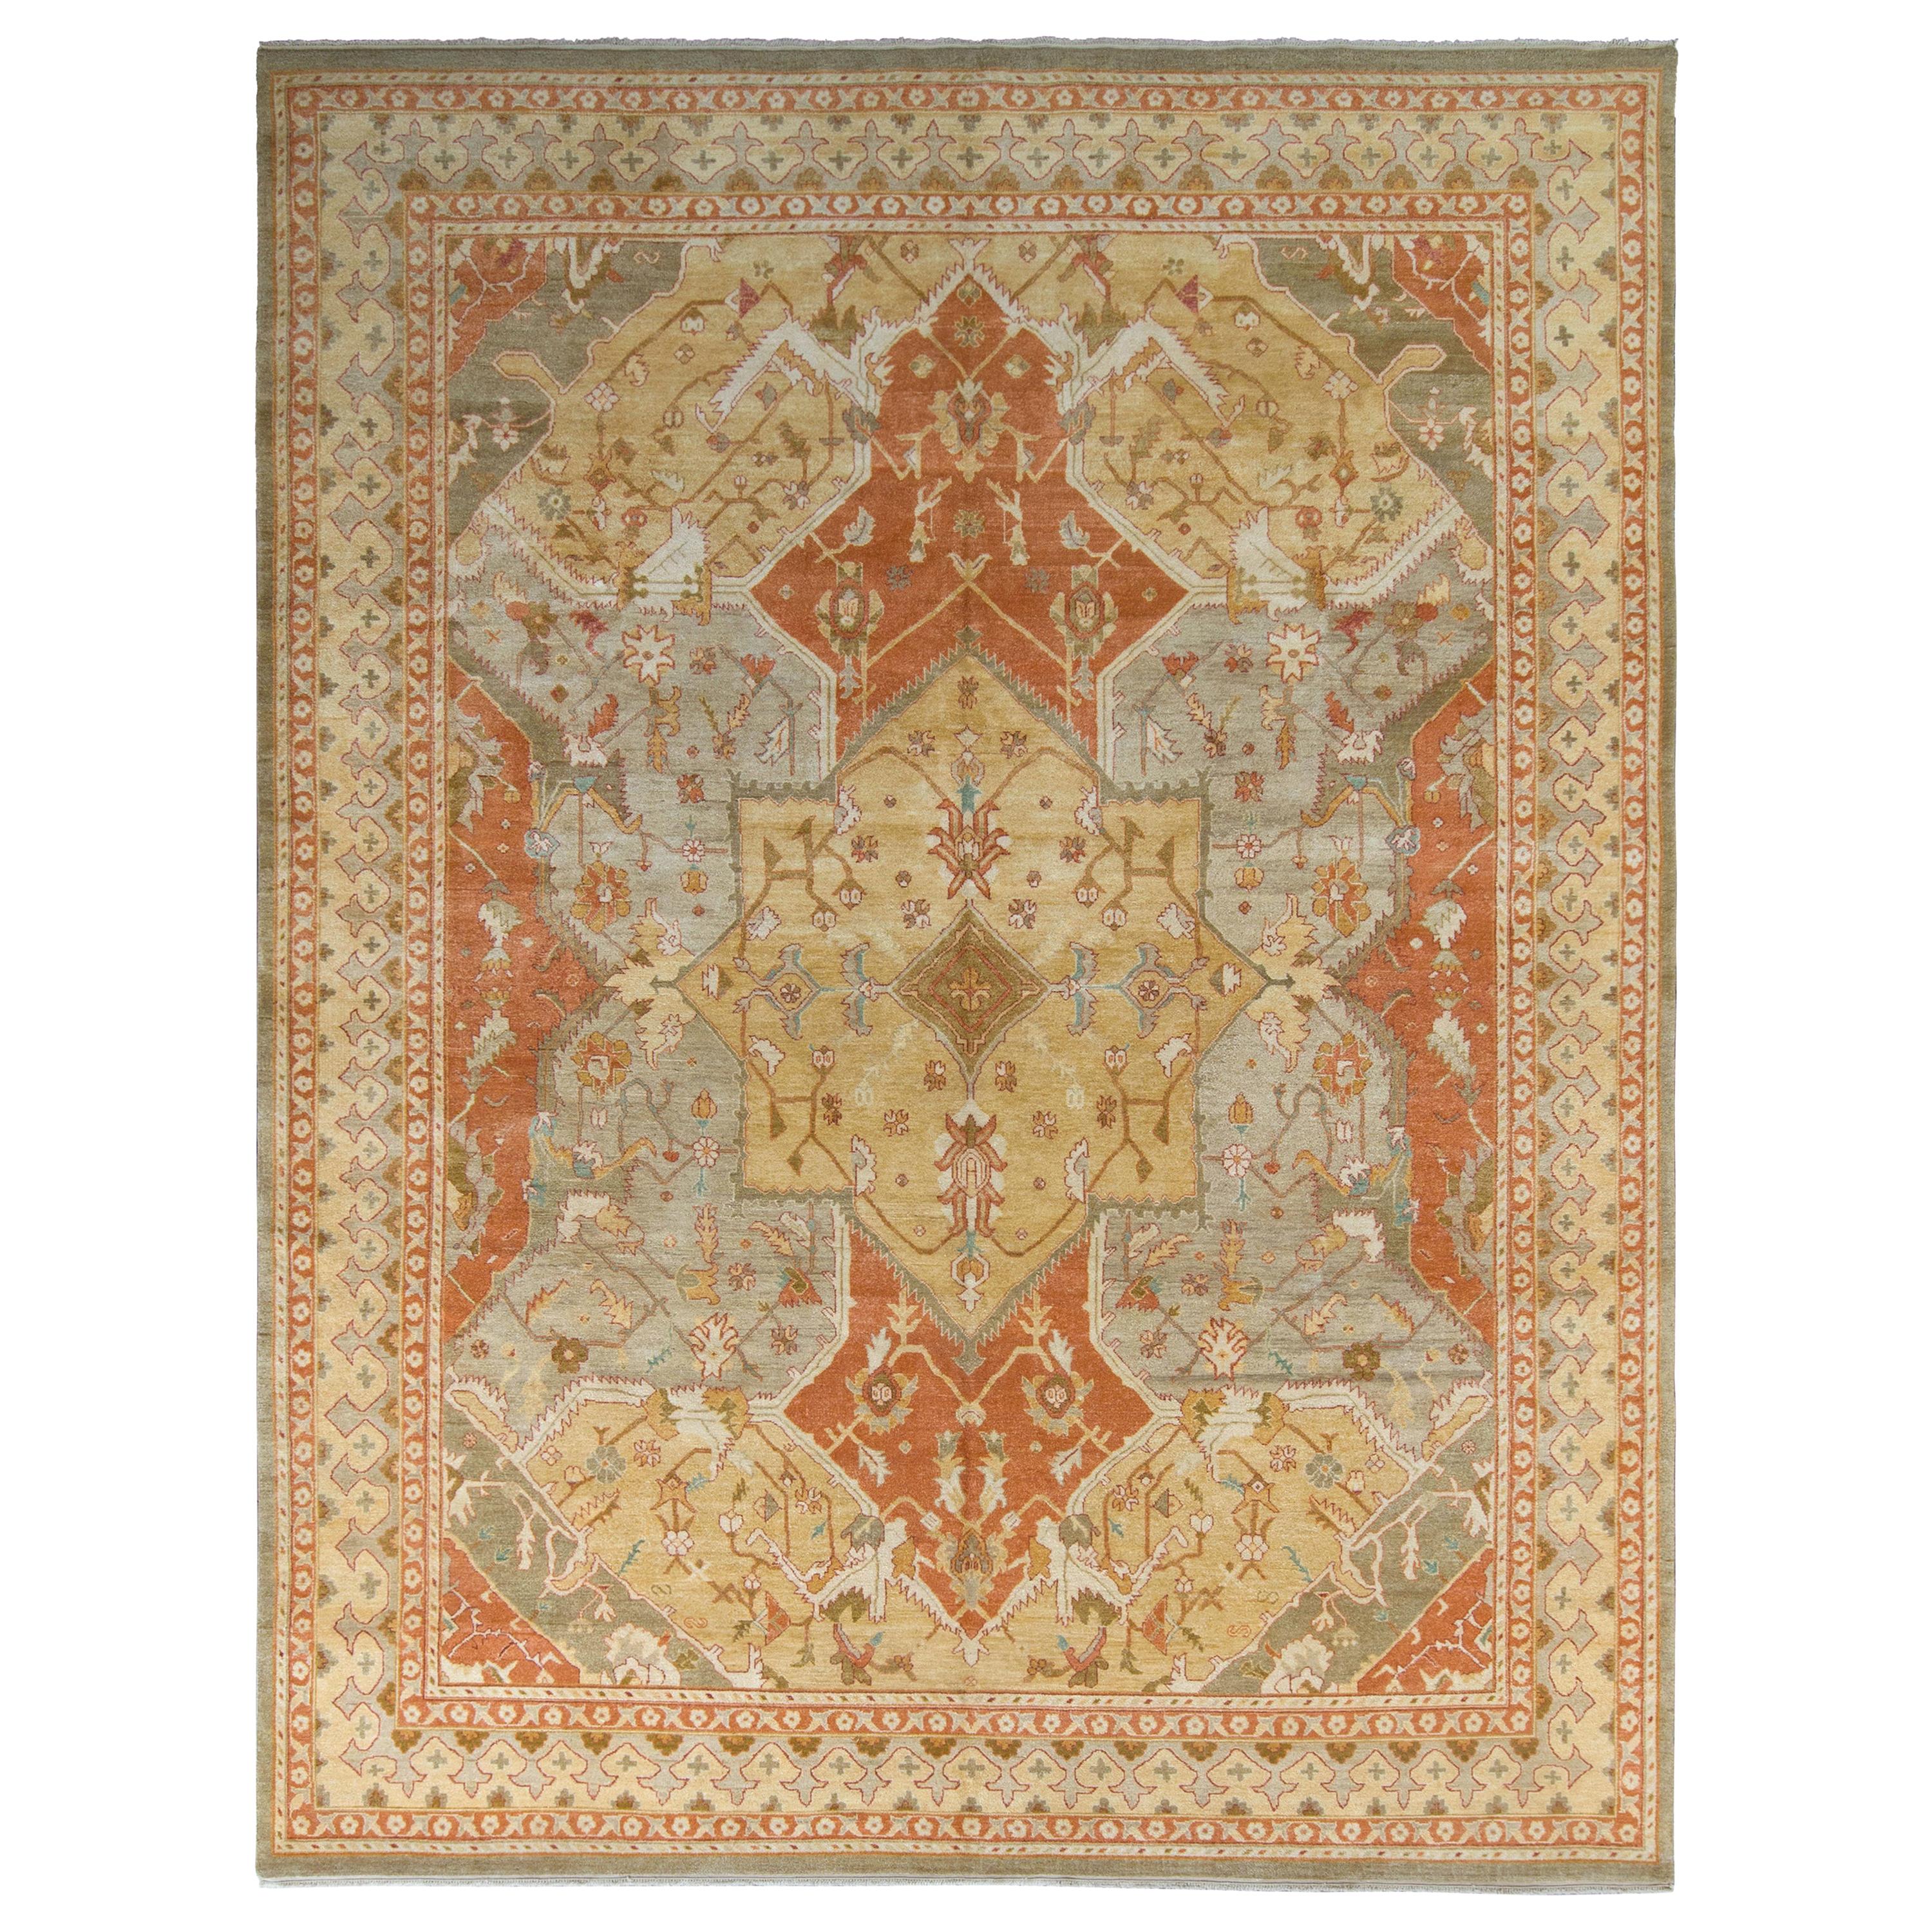 Rug & Kilim’s Polonaise Style Rug in Red and Beige-Brown Medallion Pattern For Sale